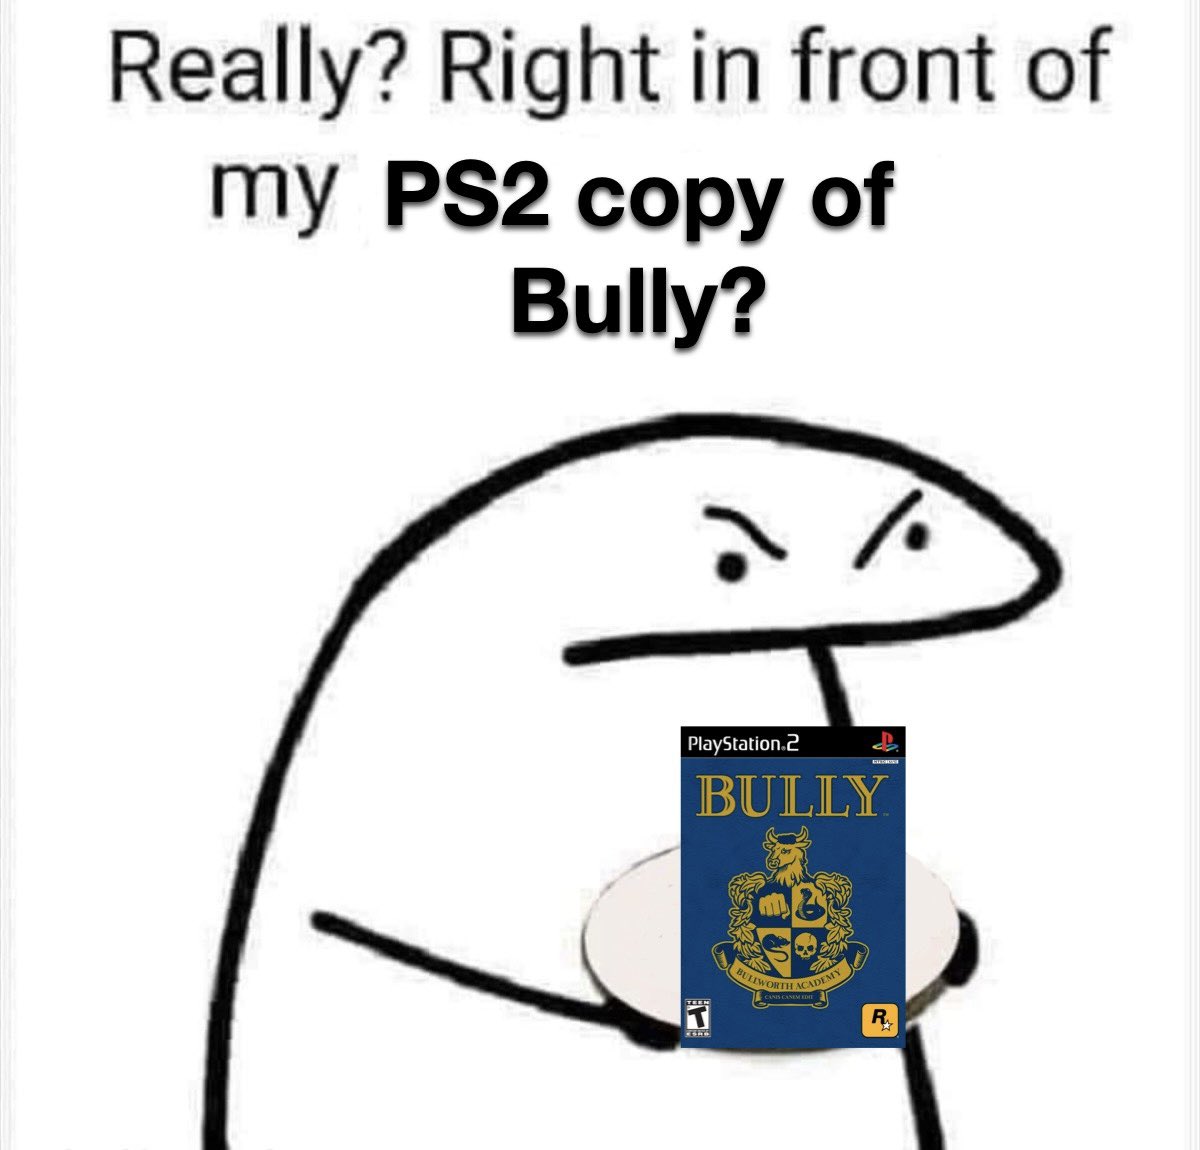 From a fan of Bully on Twitter! Seriously Rockstar Games must to